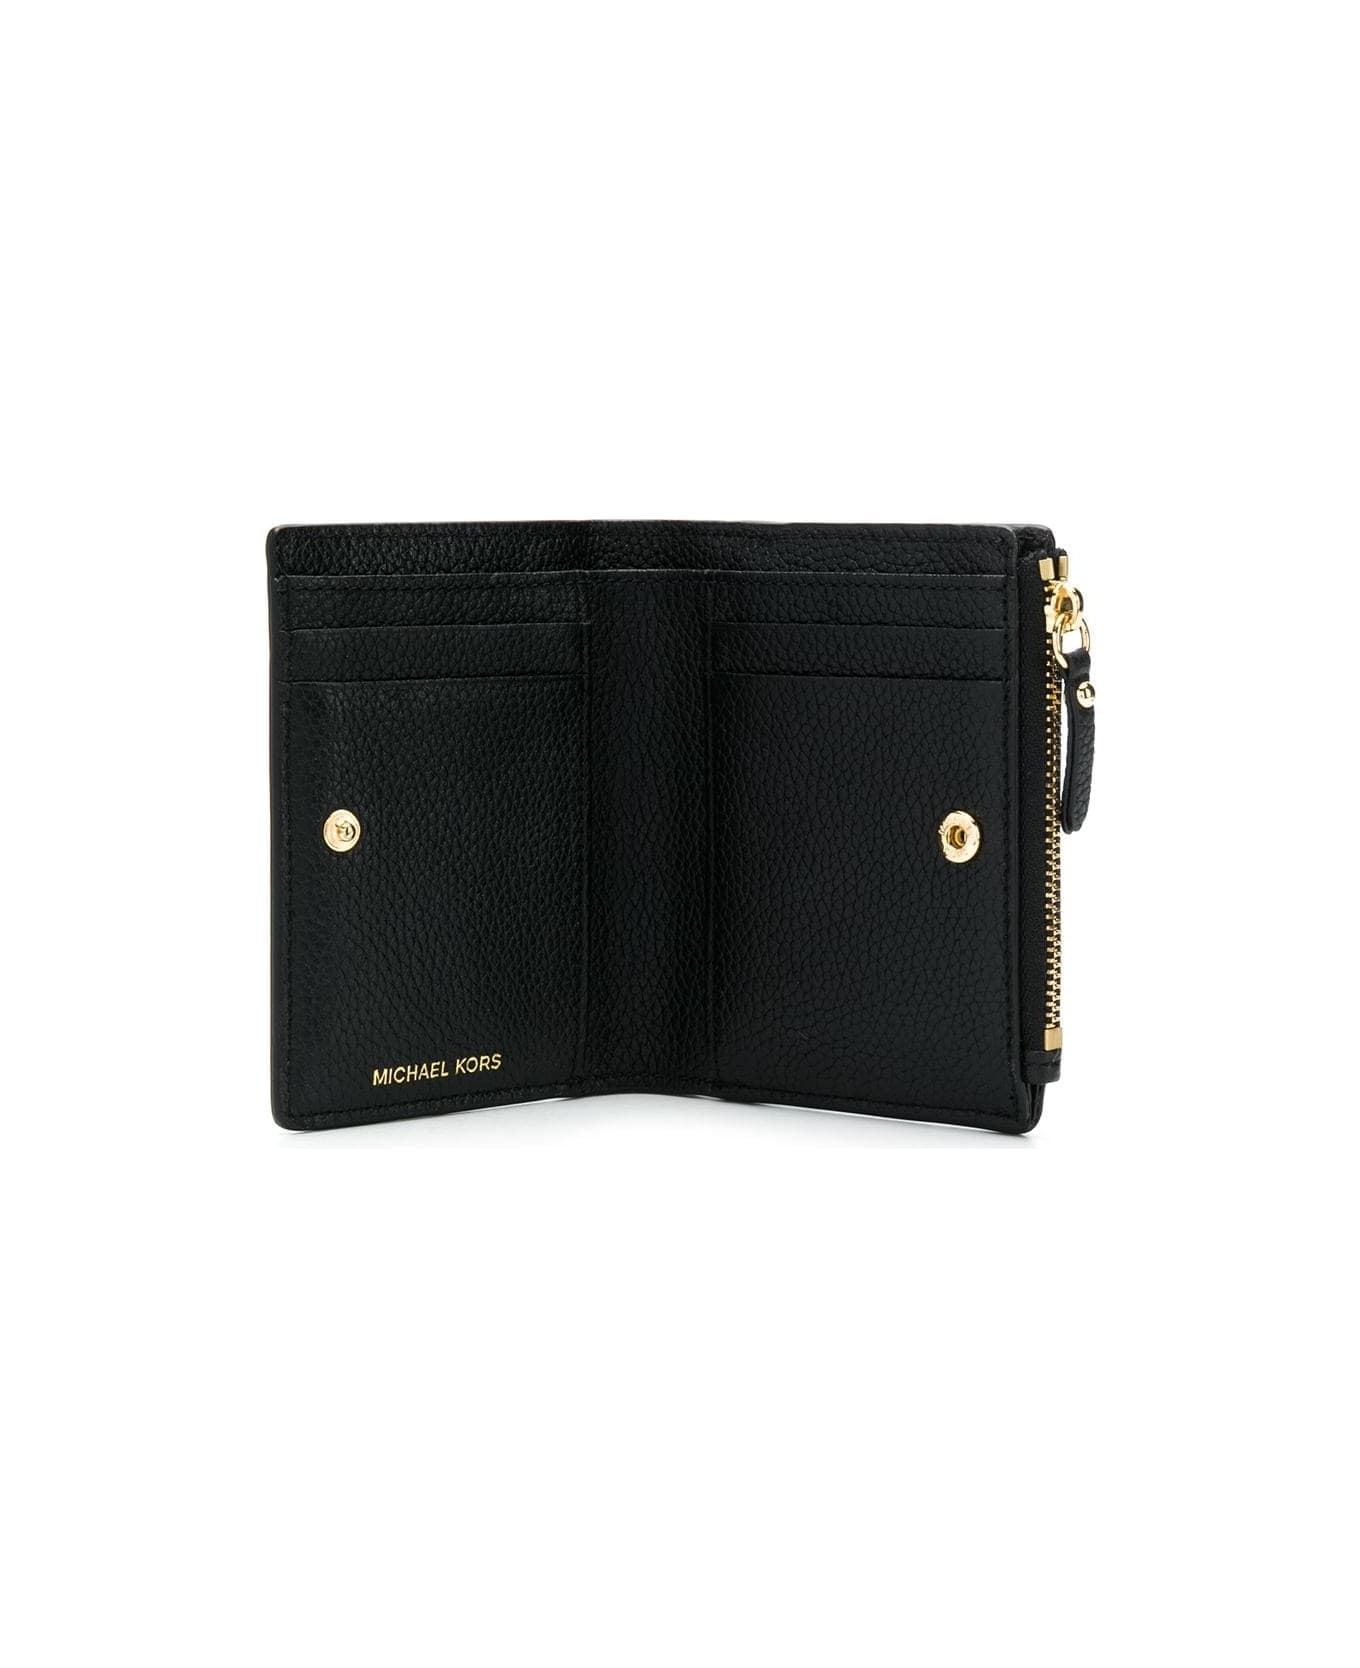 Michael Kors Wallet In Textured Leather With Logo - Black